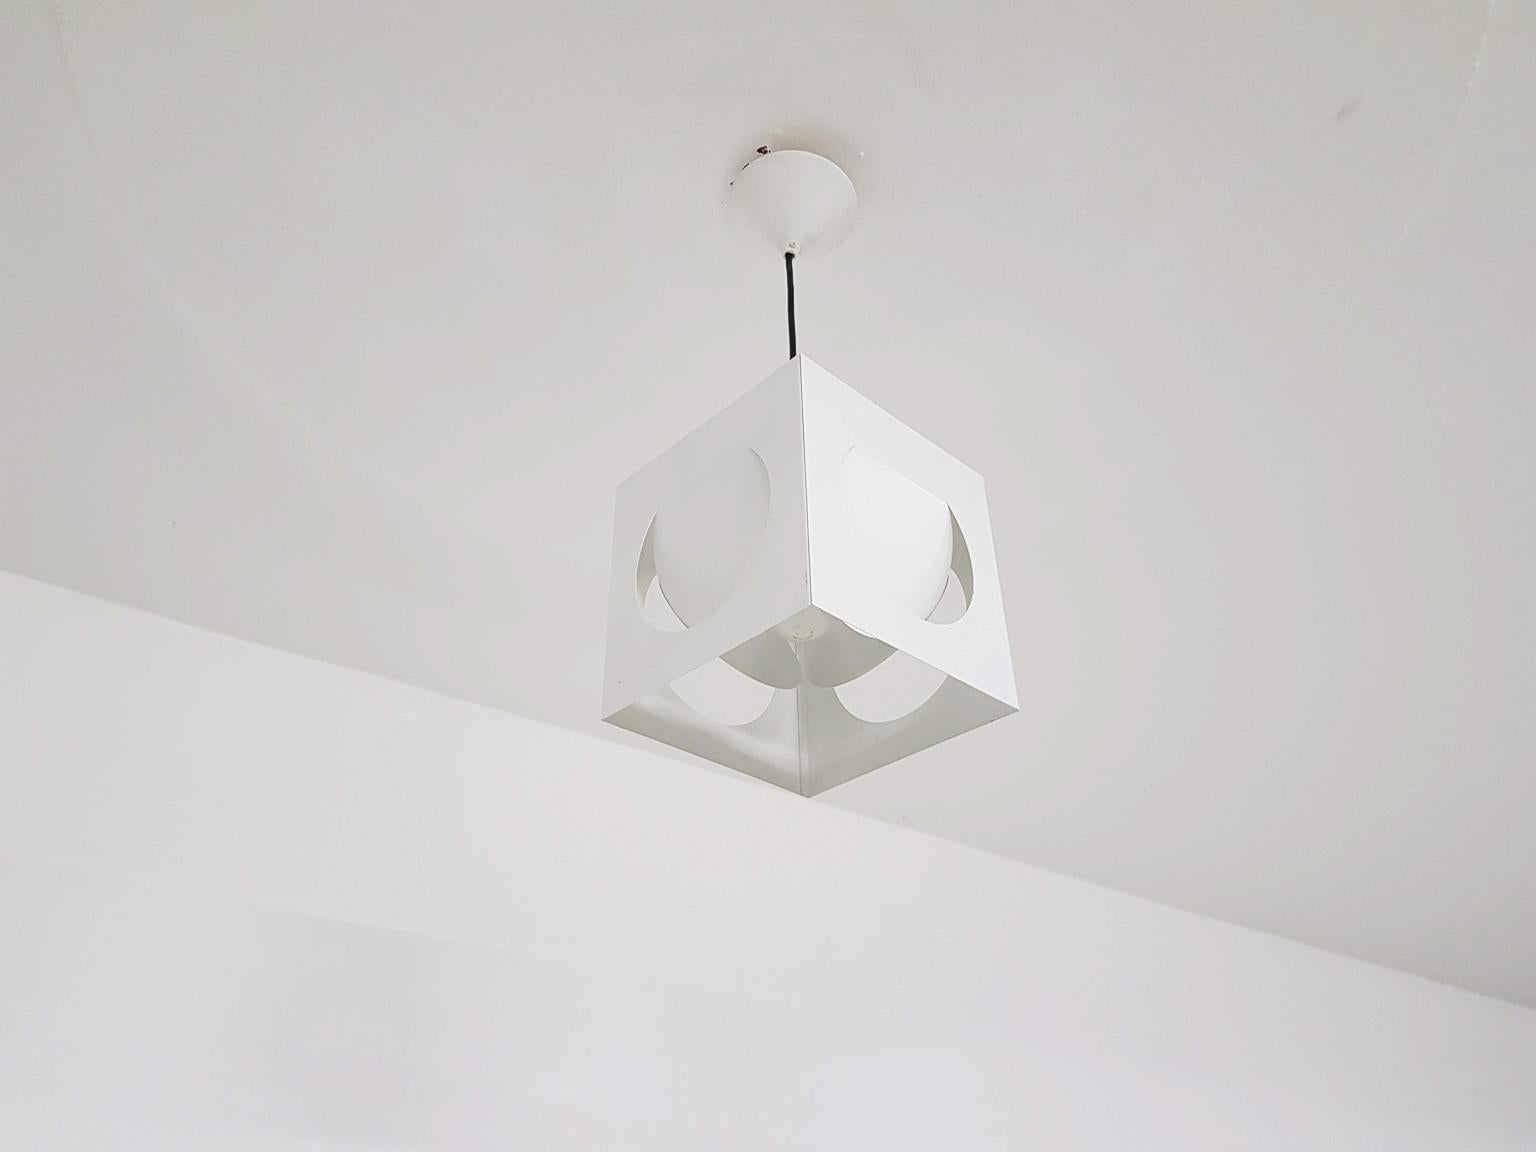 This item comes with free shipping to certain destinations. Please check ordering options.

A white Scandinavian Design pendant lamp Model 61-193 by Shogo Suzuki for Stockmann Orno Finland, 1963-1964

This little square geometric chandelier has